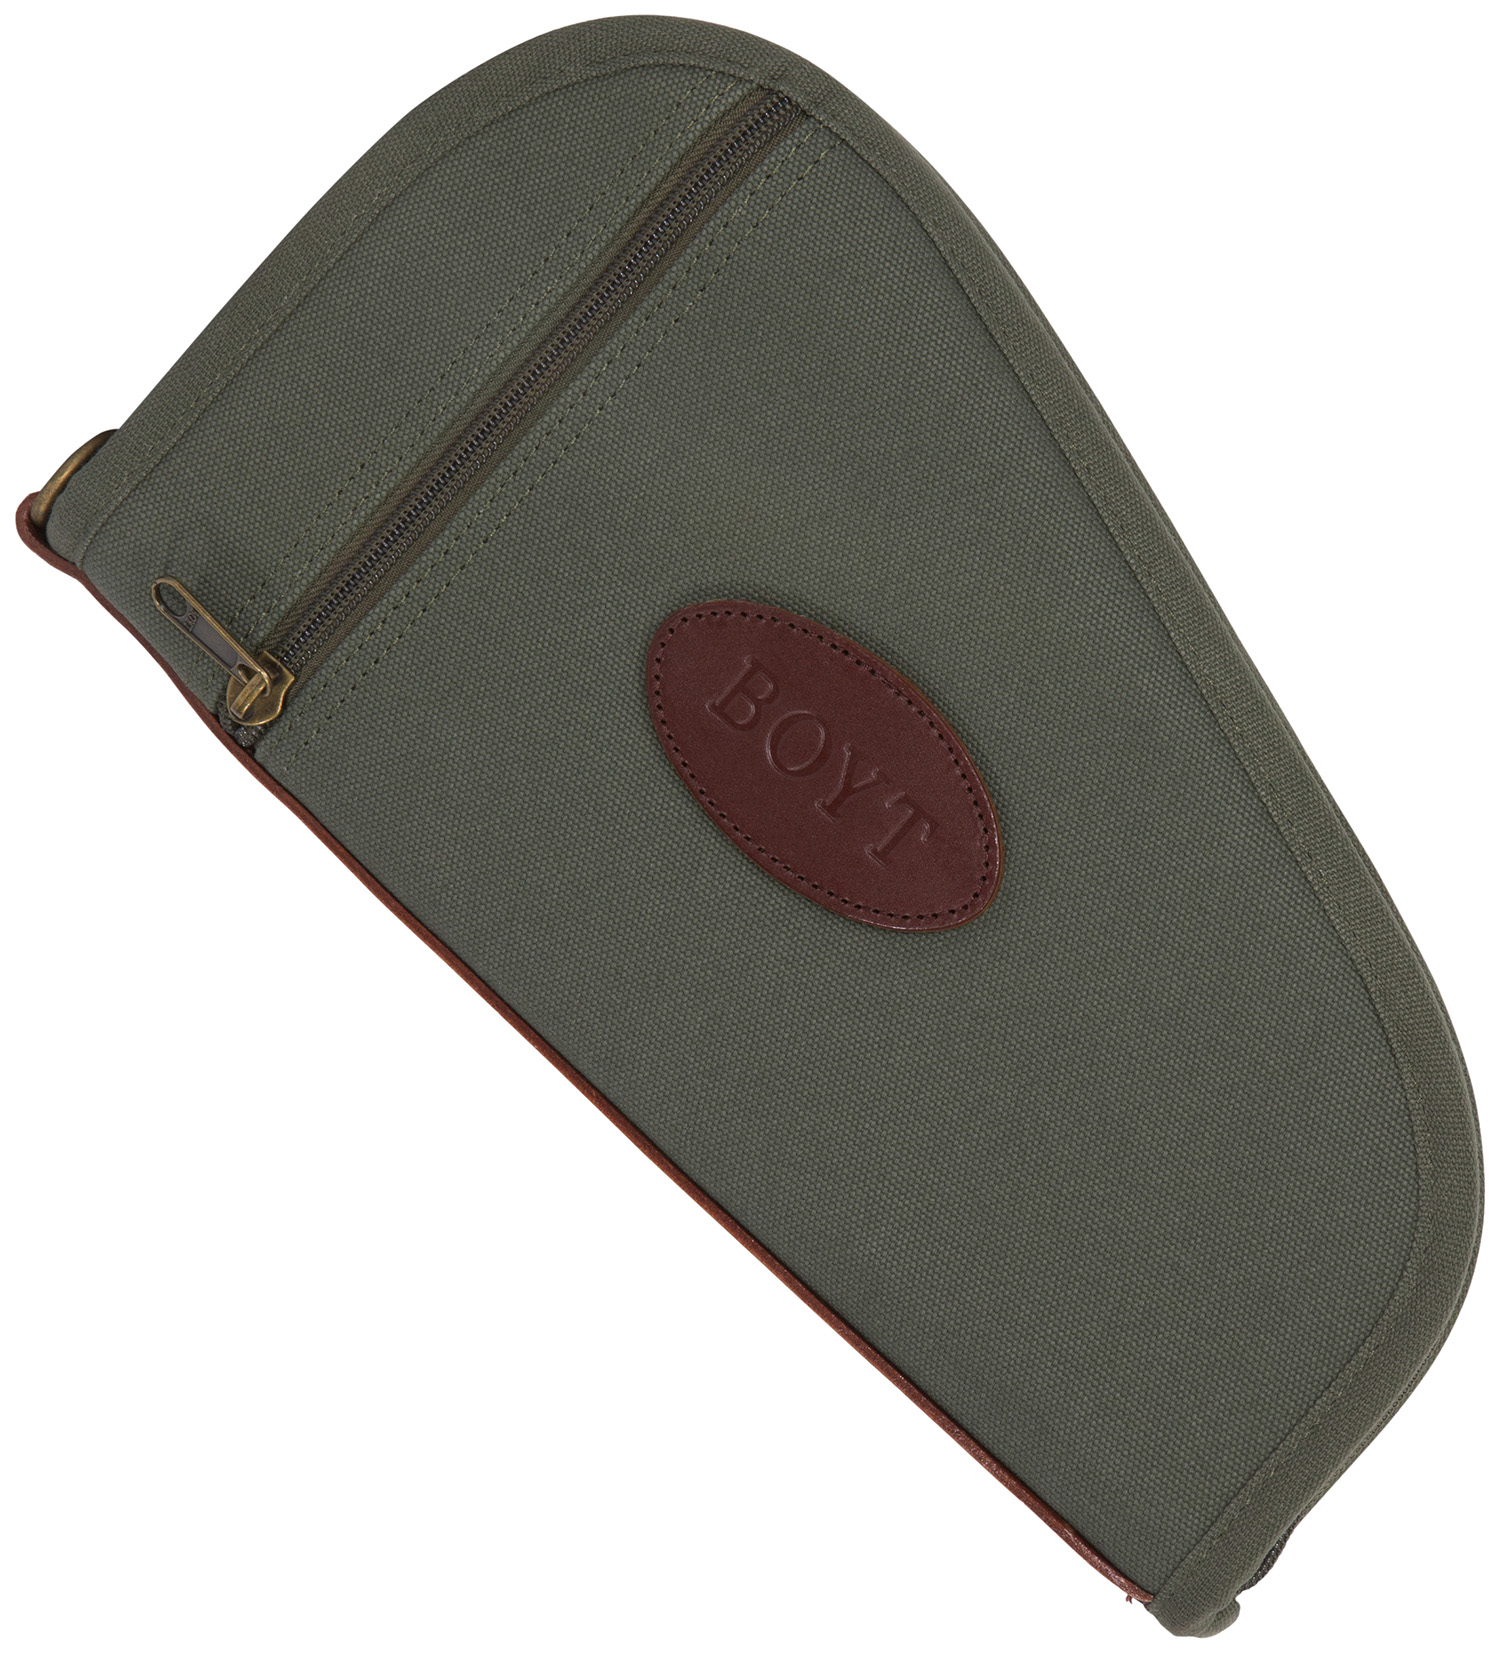 Boyt Harness PP41OD Heart-Shaped Pistol Case made of Waxed Canvas with OD Green Finish, Quilted Flannel Lining, Full Length Zipper & Padding